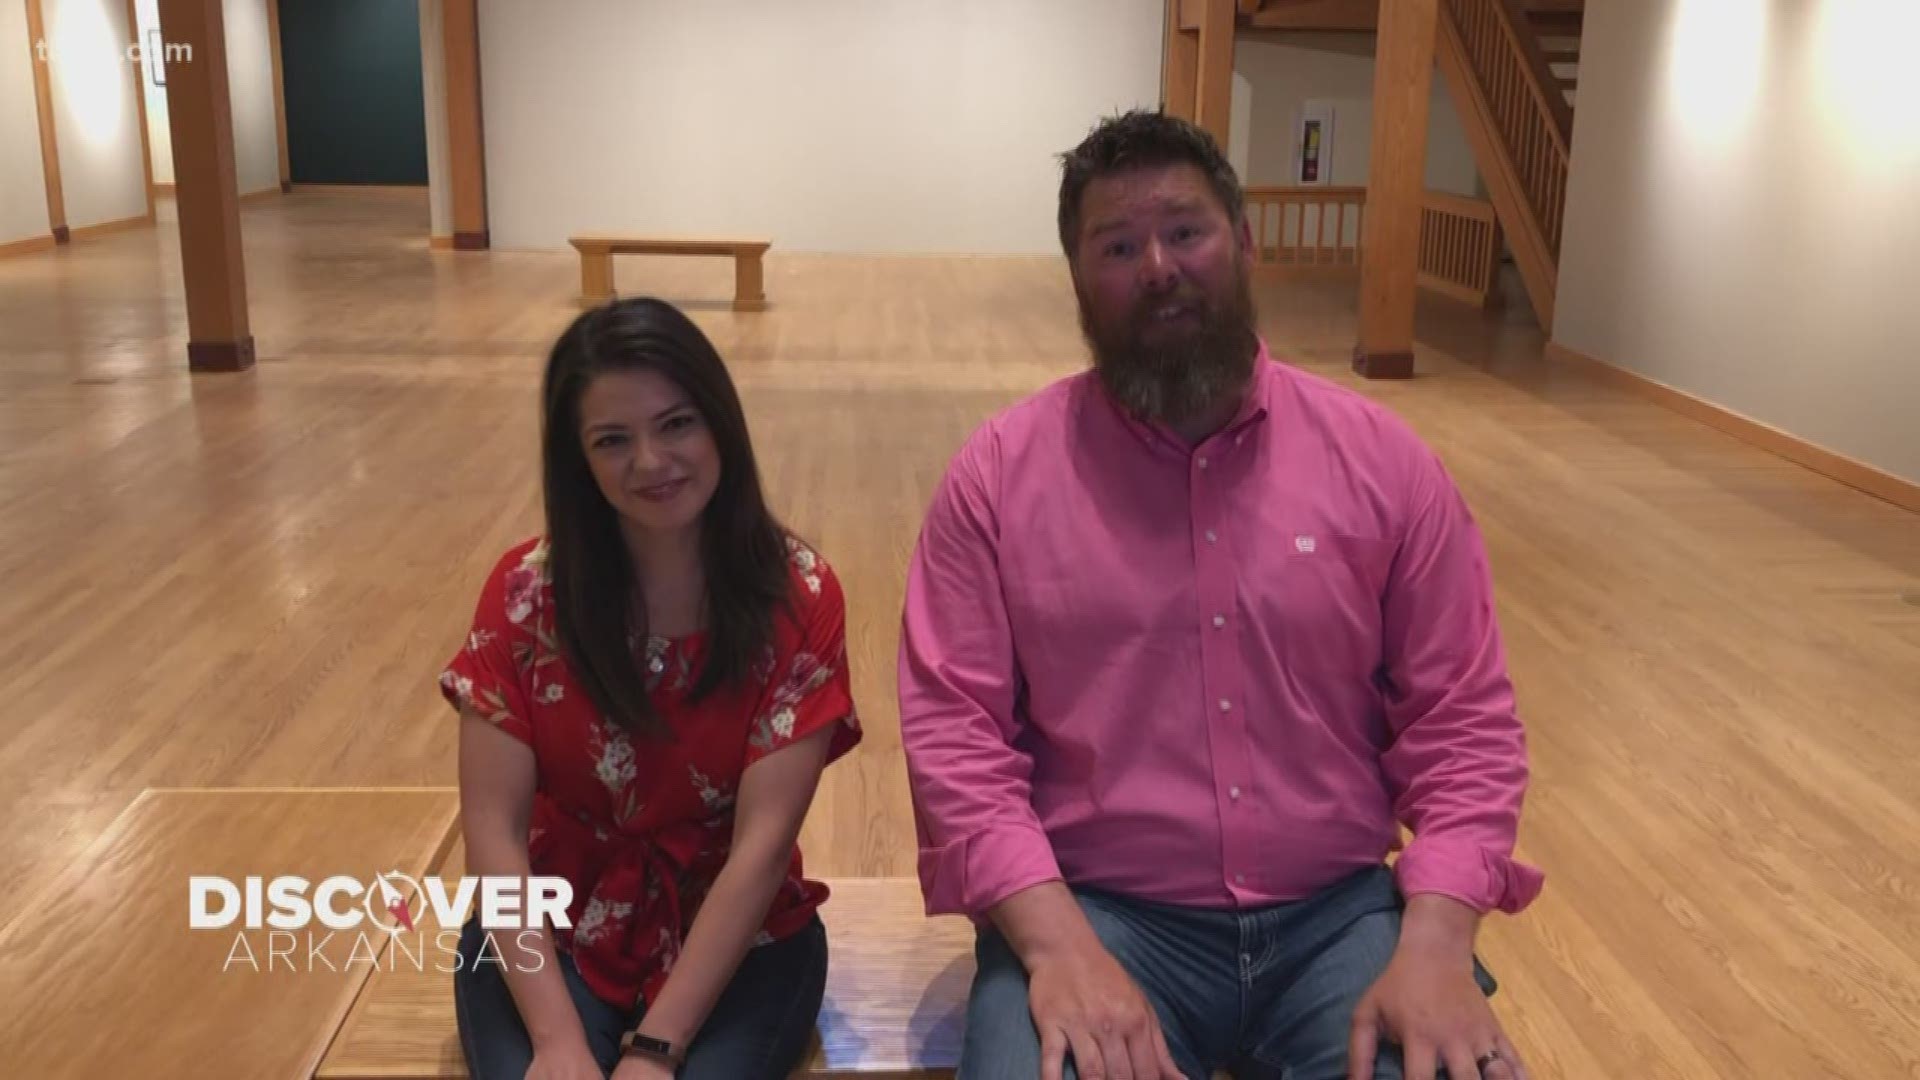 On this week's episode of Discover Arkansas, we're taking you to Downtown Little Rock. The Historic Arkansas Museum allows you to take a step back in time to what the city looked like in it's early days.